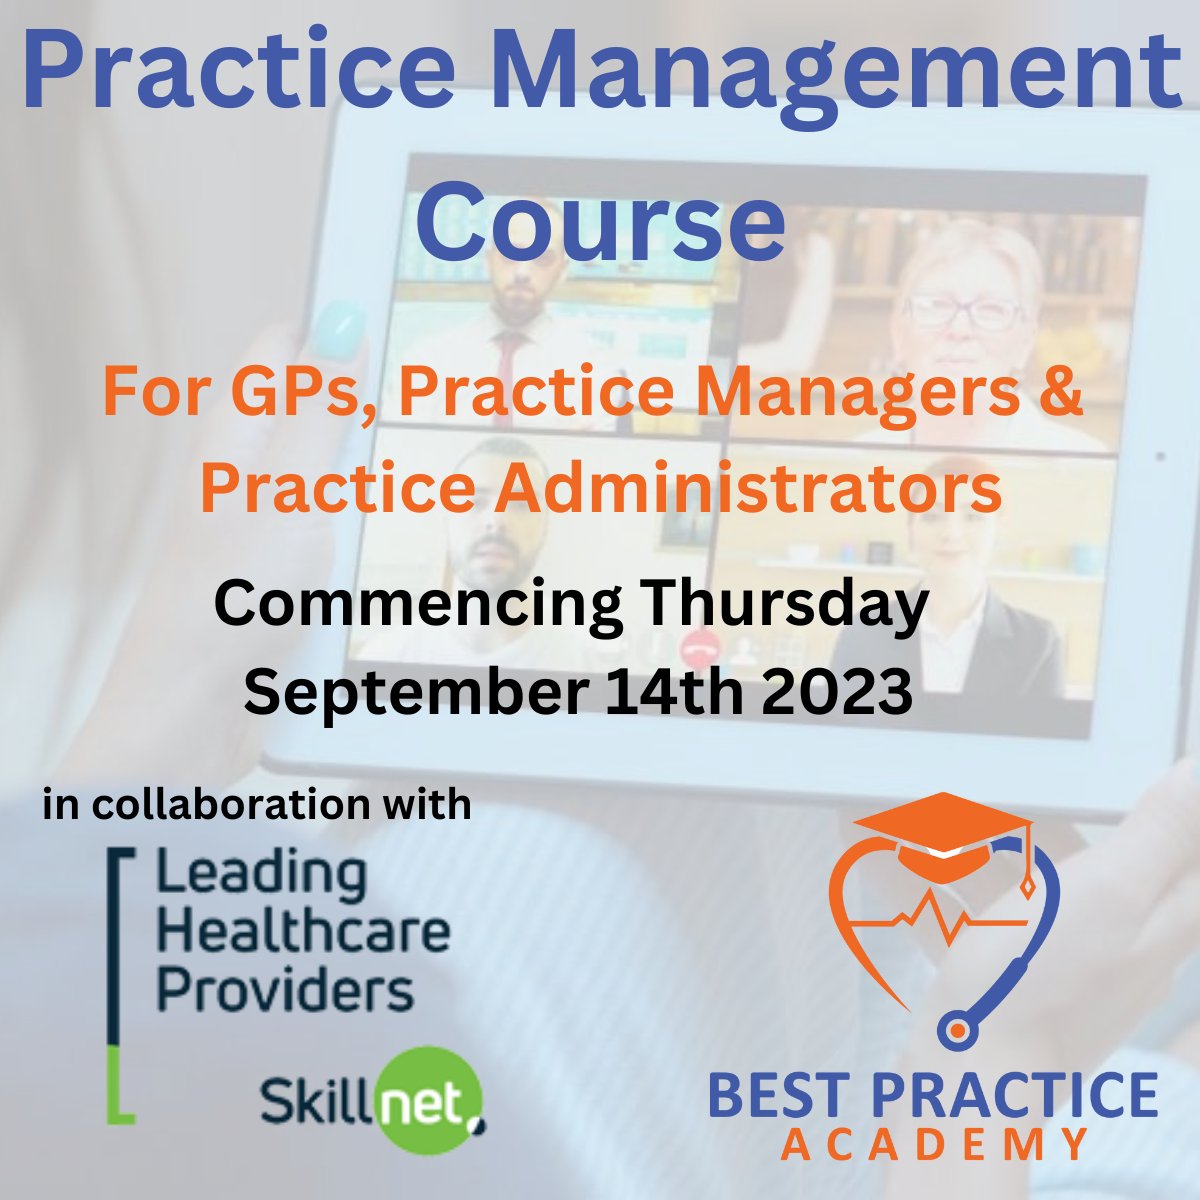 Just over 4 weeks to go!
In collaboration with @LhpSkillnet 
“A very good course to get an overall view of Practice Management, schemes & funds available. Tips to help you improve your Practice and techniques to deal with certain issues as they arise”
Evette – PM, Roscommon